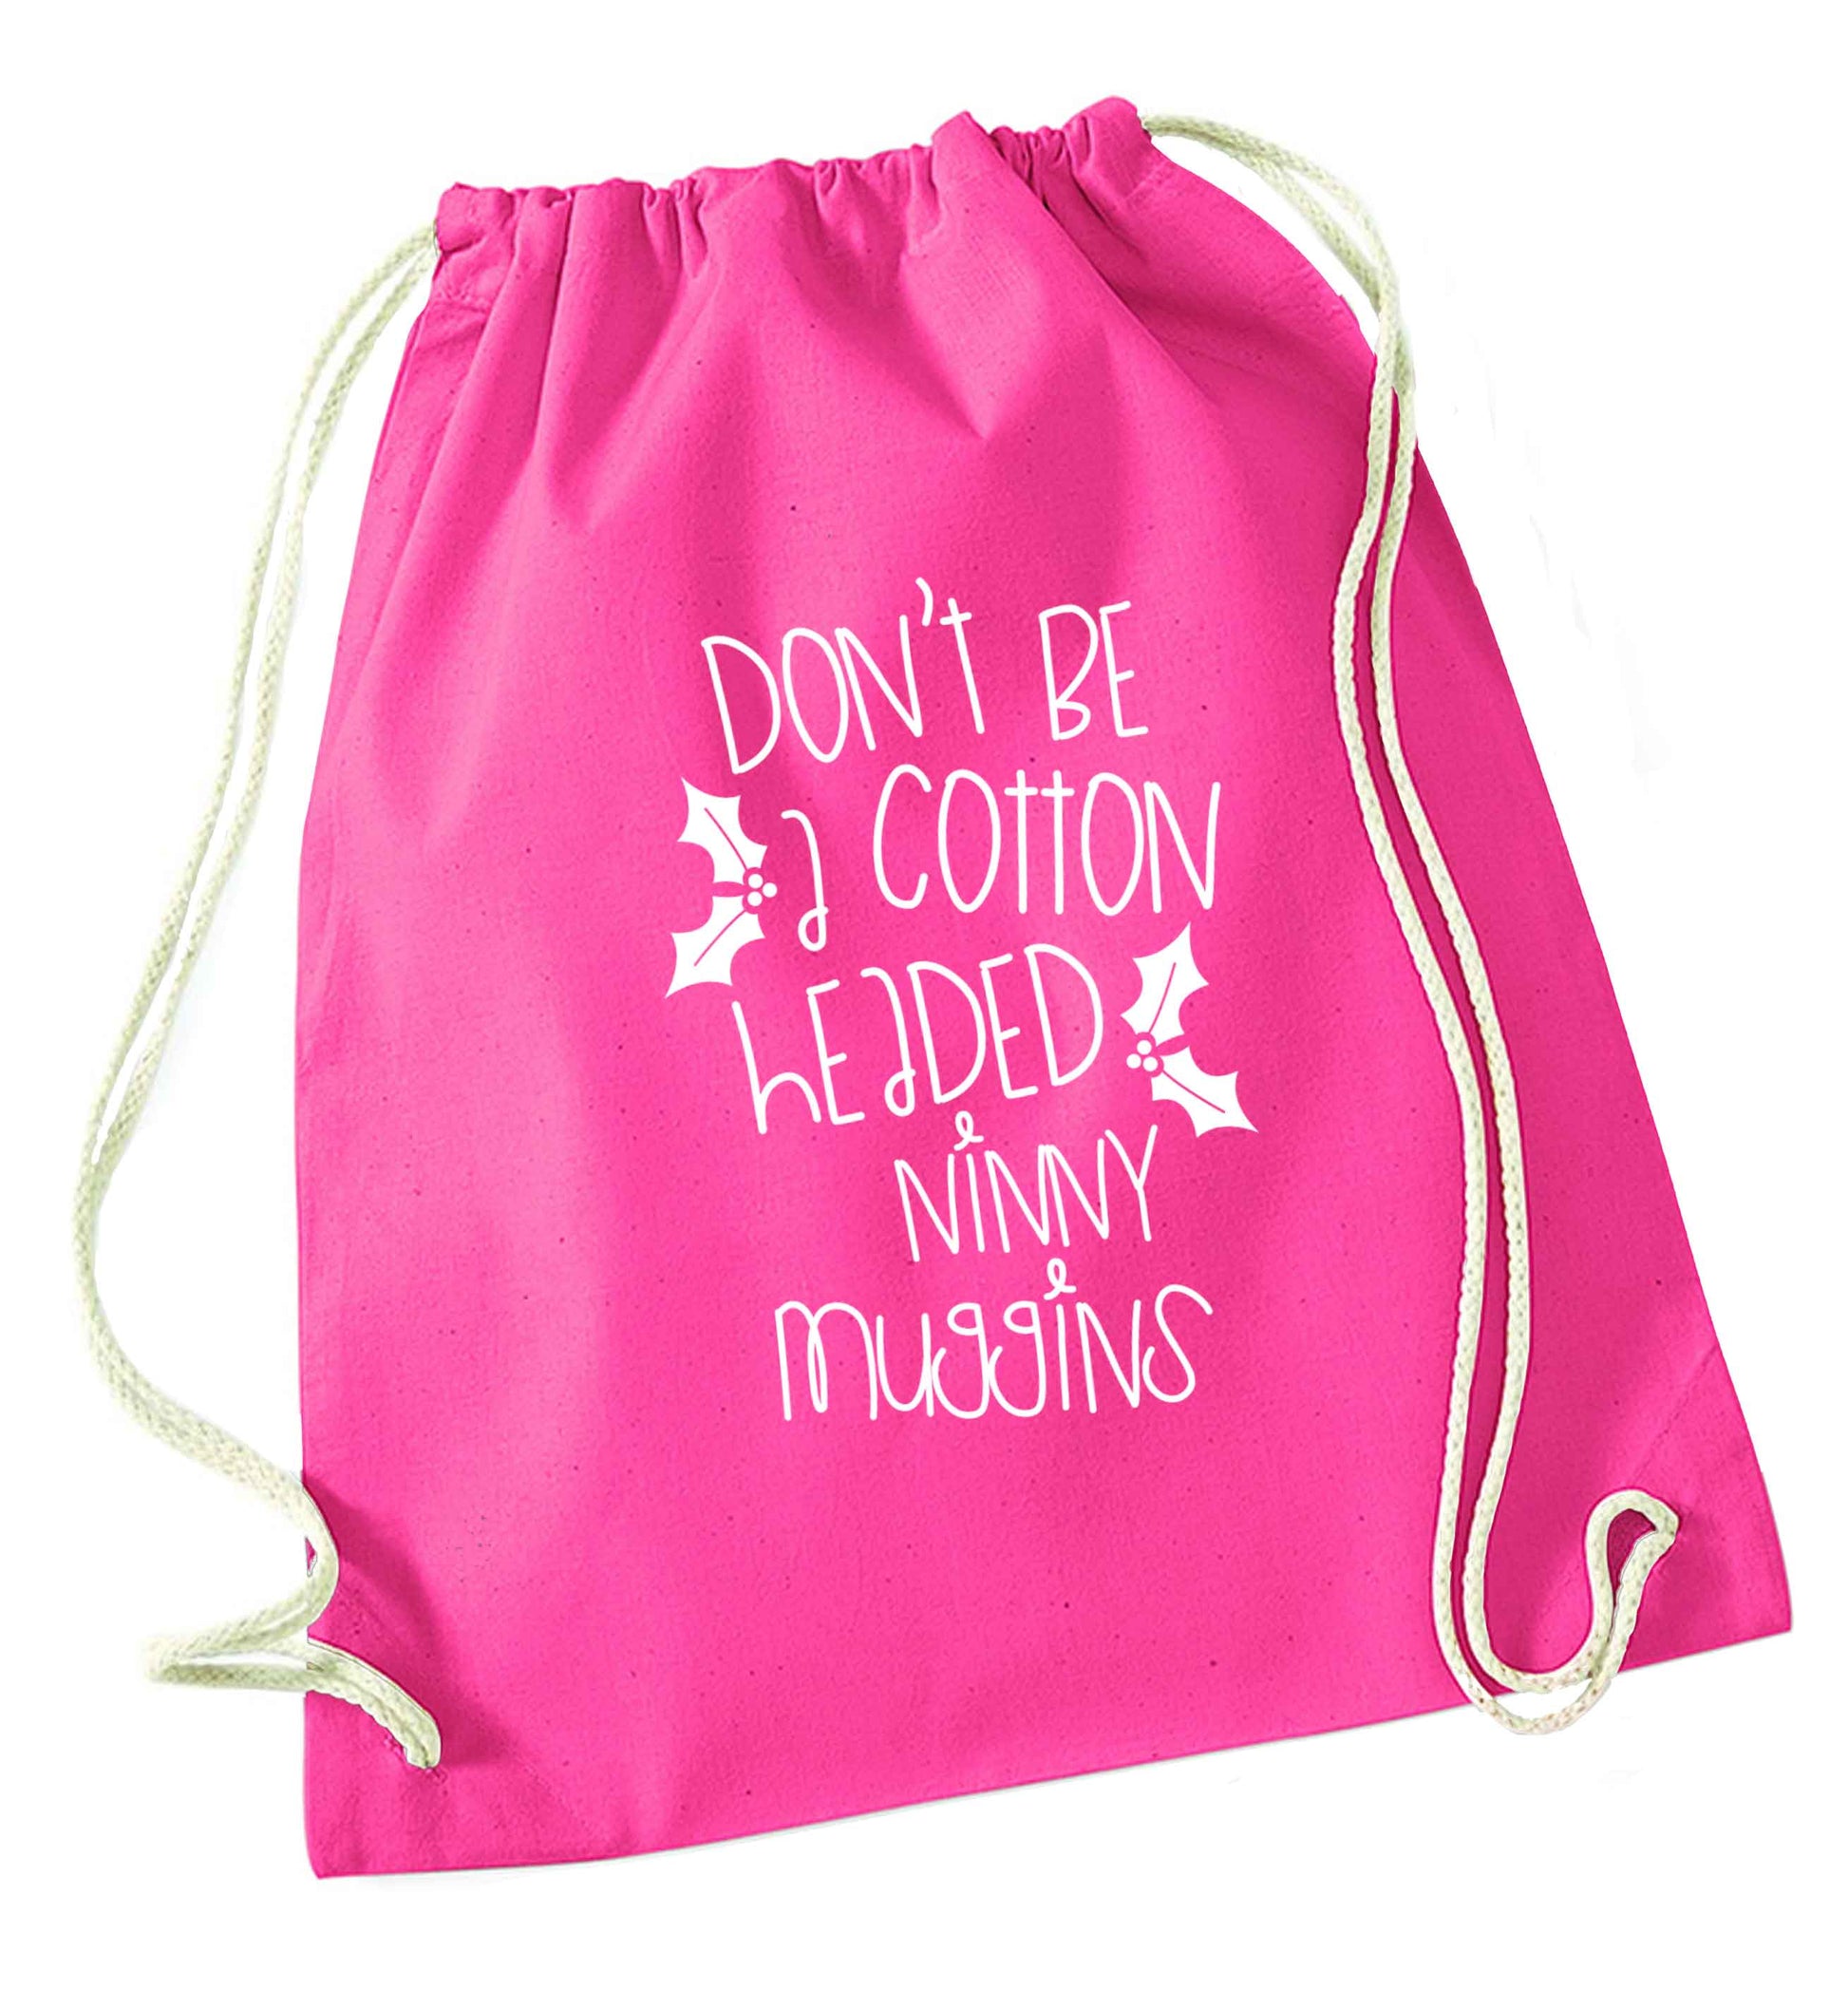 Too Late to be Good pink drawstring bag